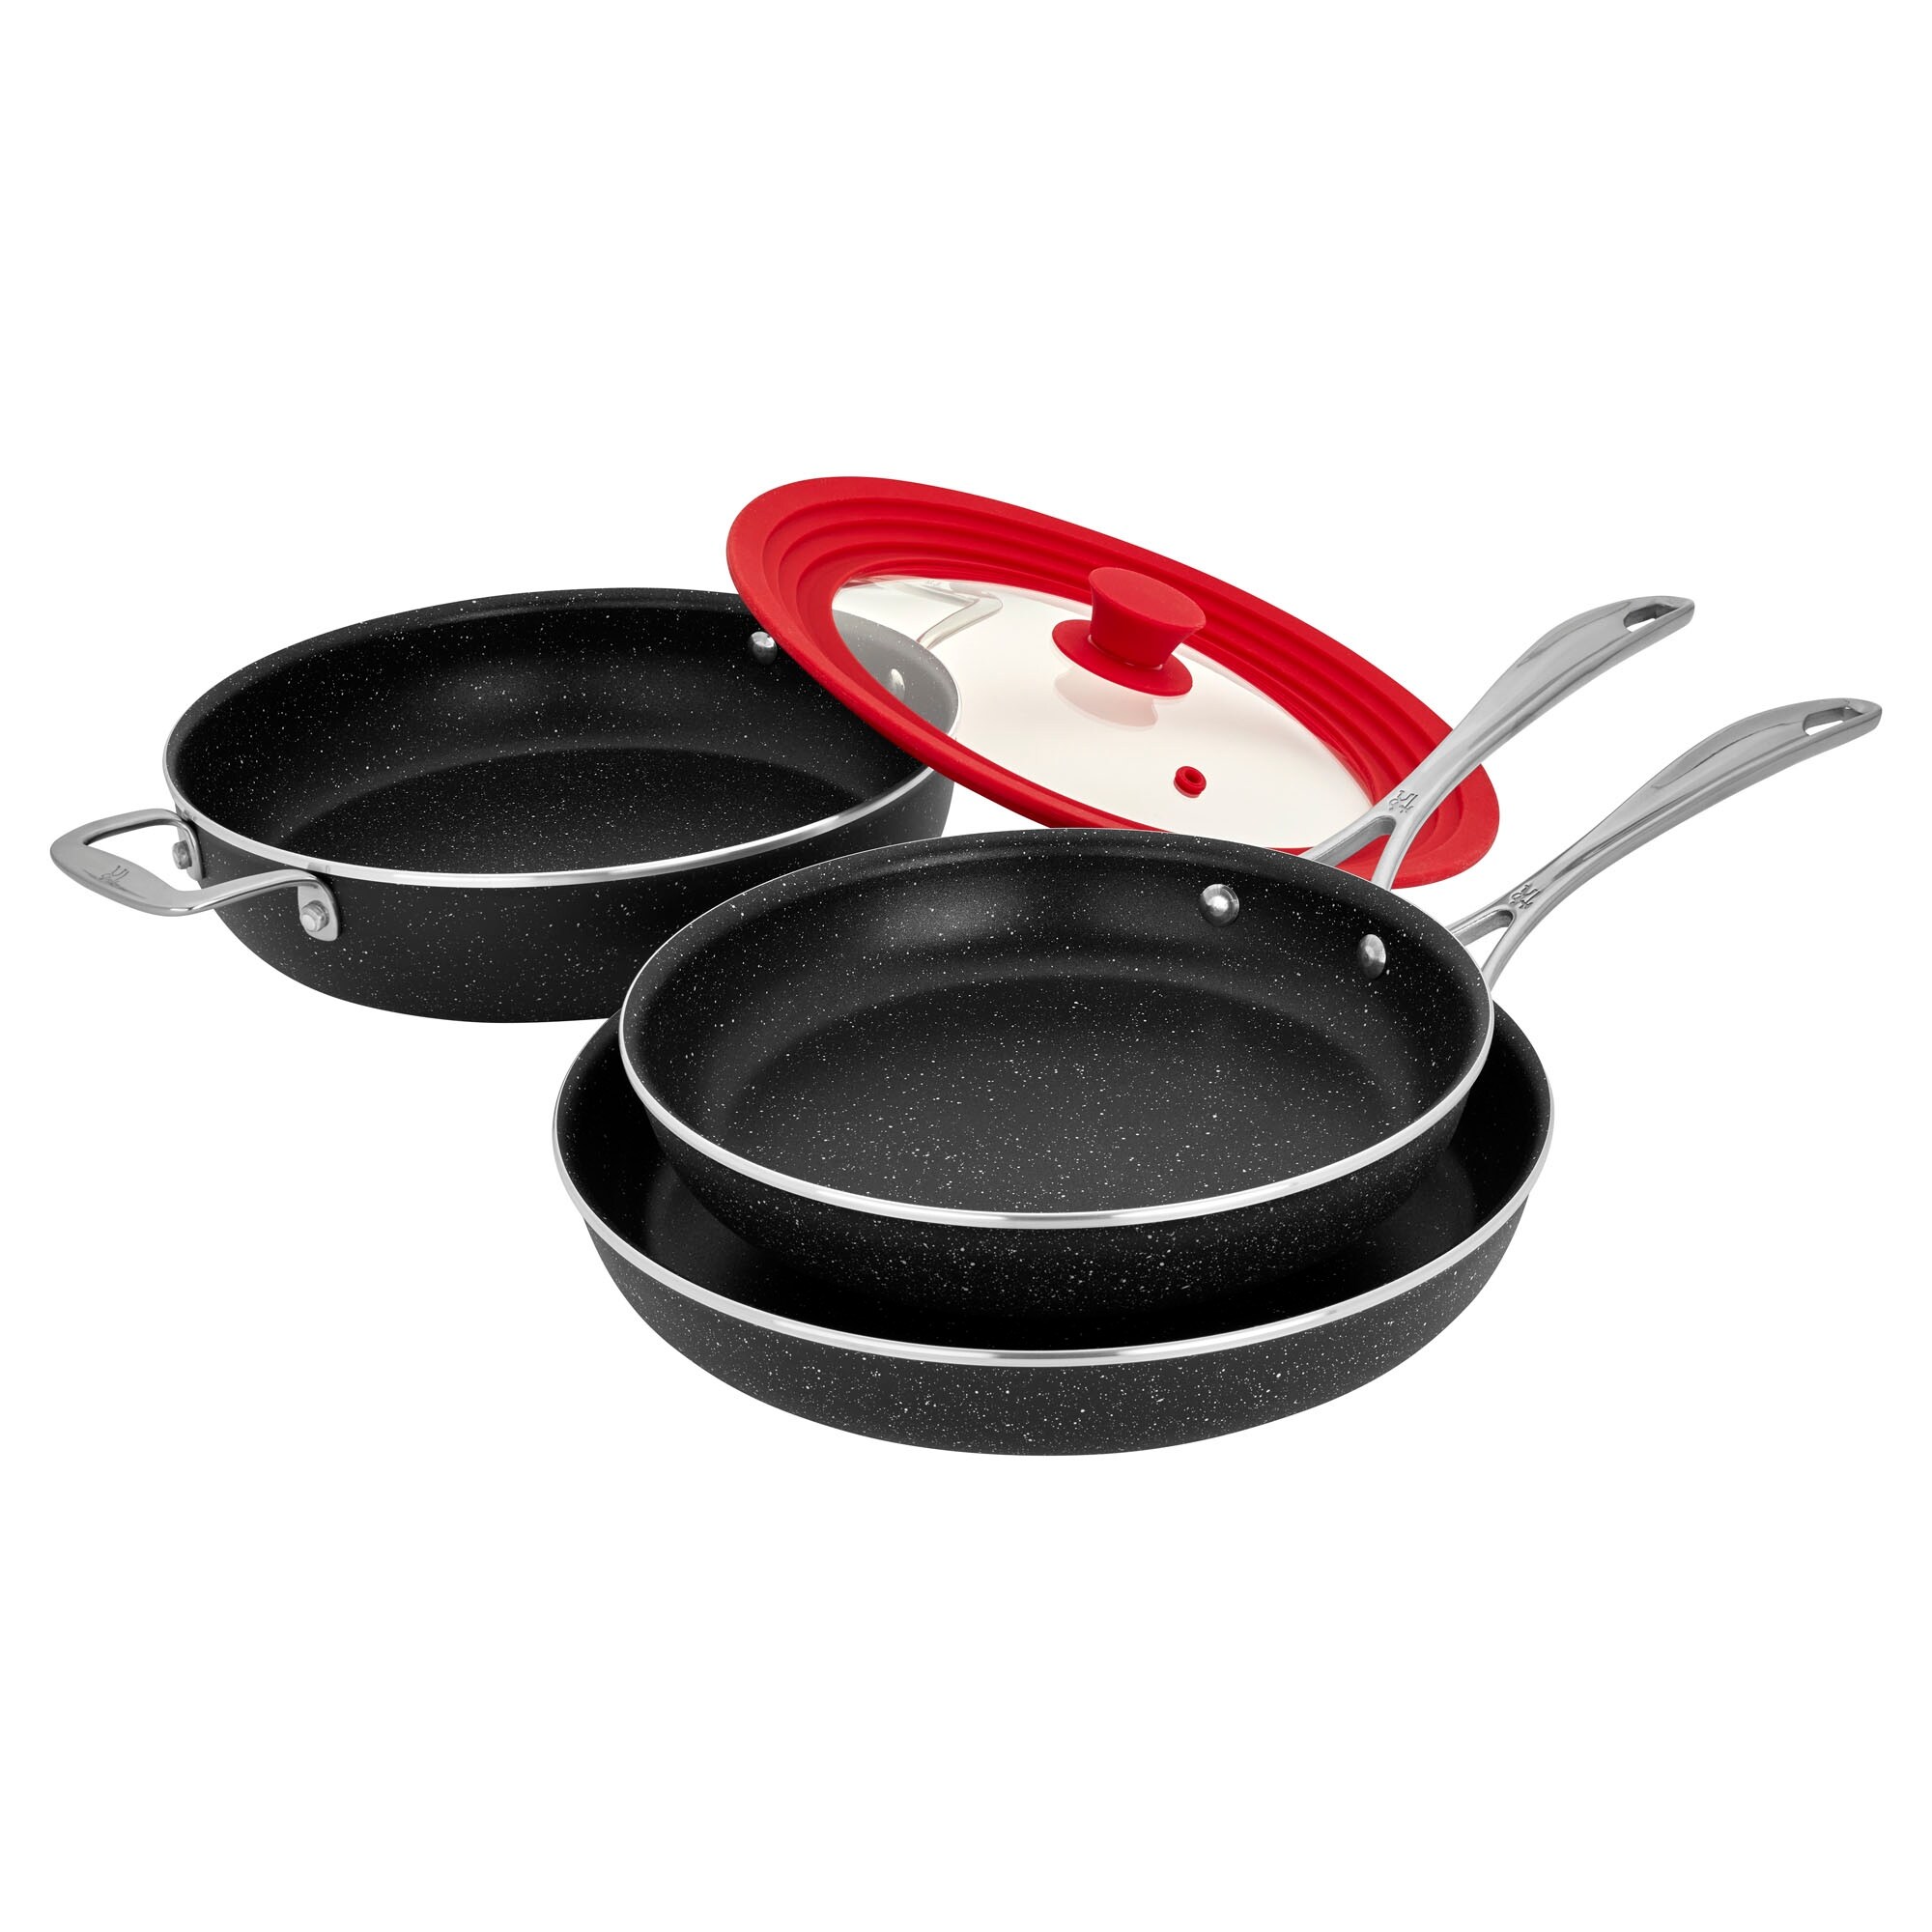 https://ak1.ostkcdn.com/images/products/is/images/direct/bba51be8c6b5f784b21536eb67080011e918c7f7/Henckels-Capri-Notte-4-pc-Aluminum-Nonstick-Cookware-Set-with-Universal-Lid.jpg